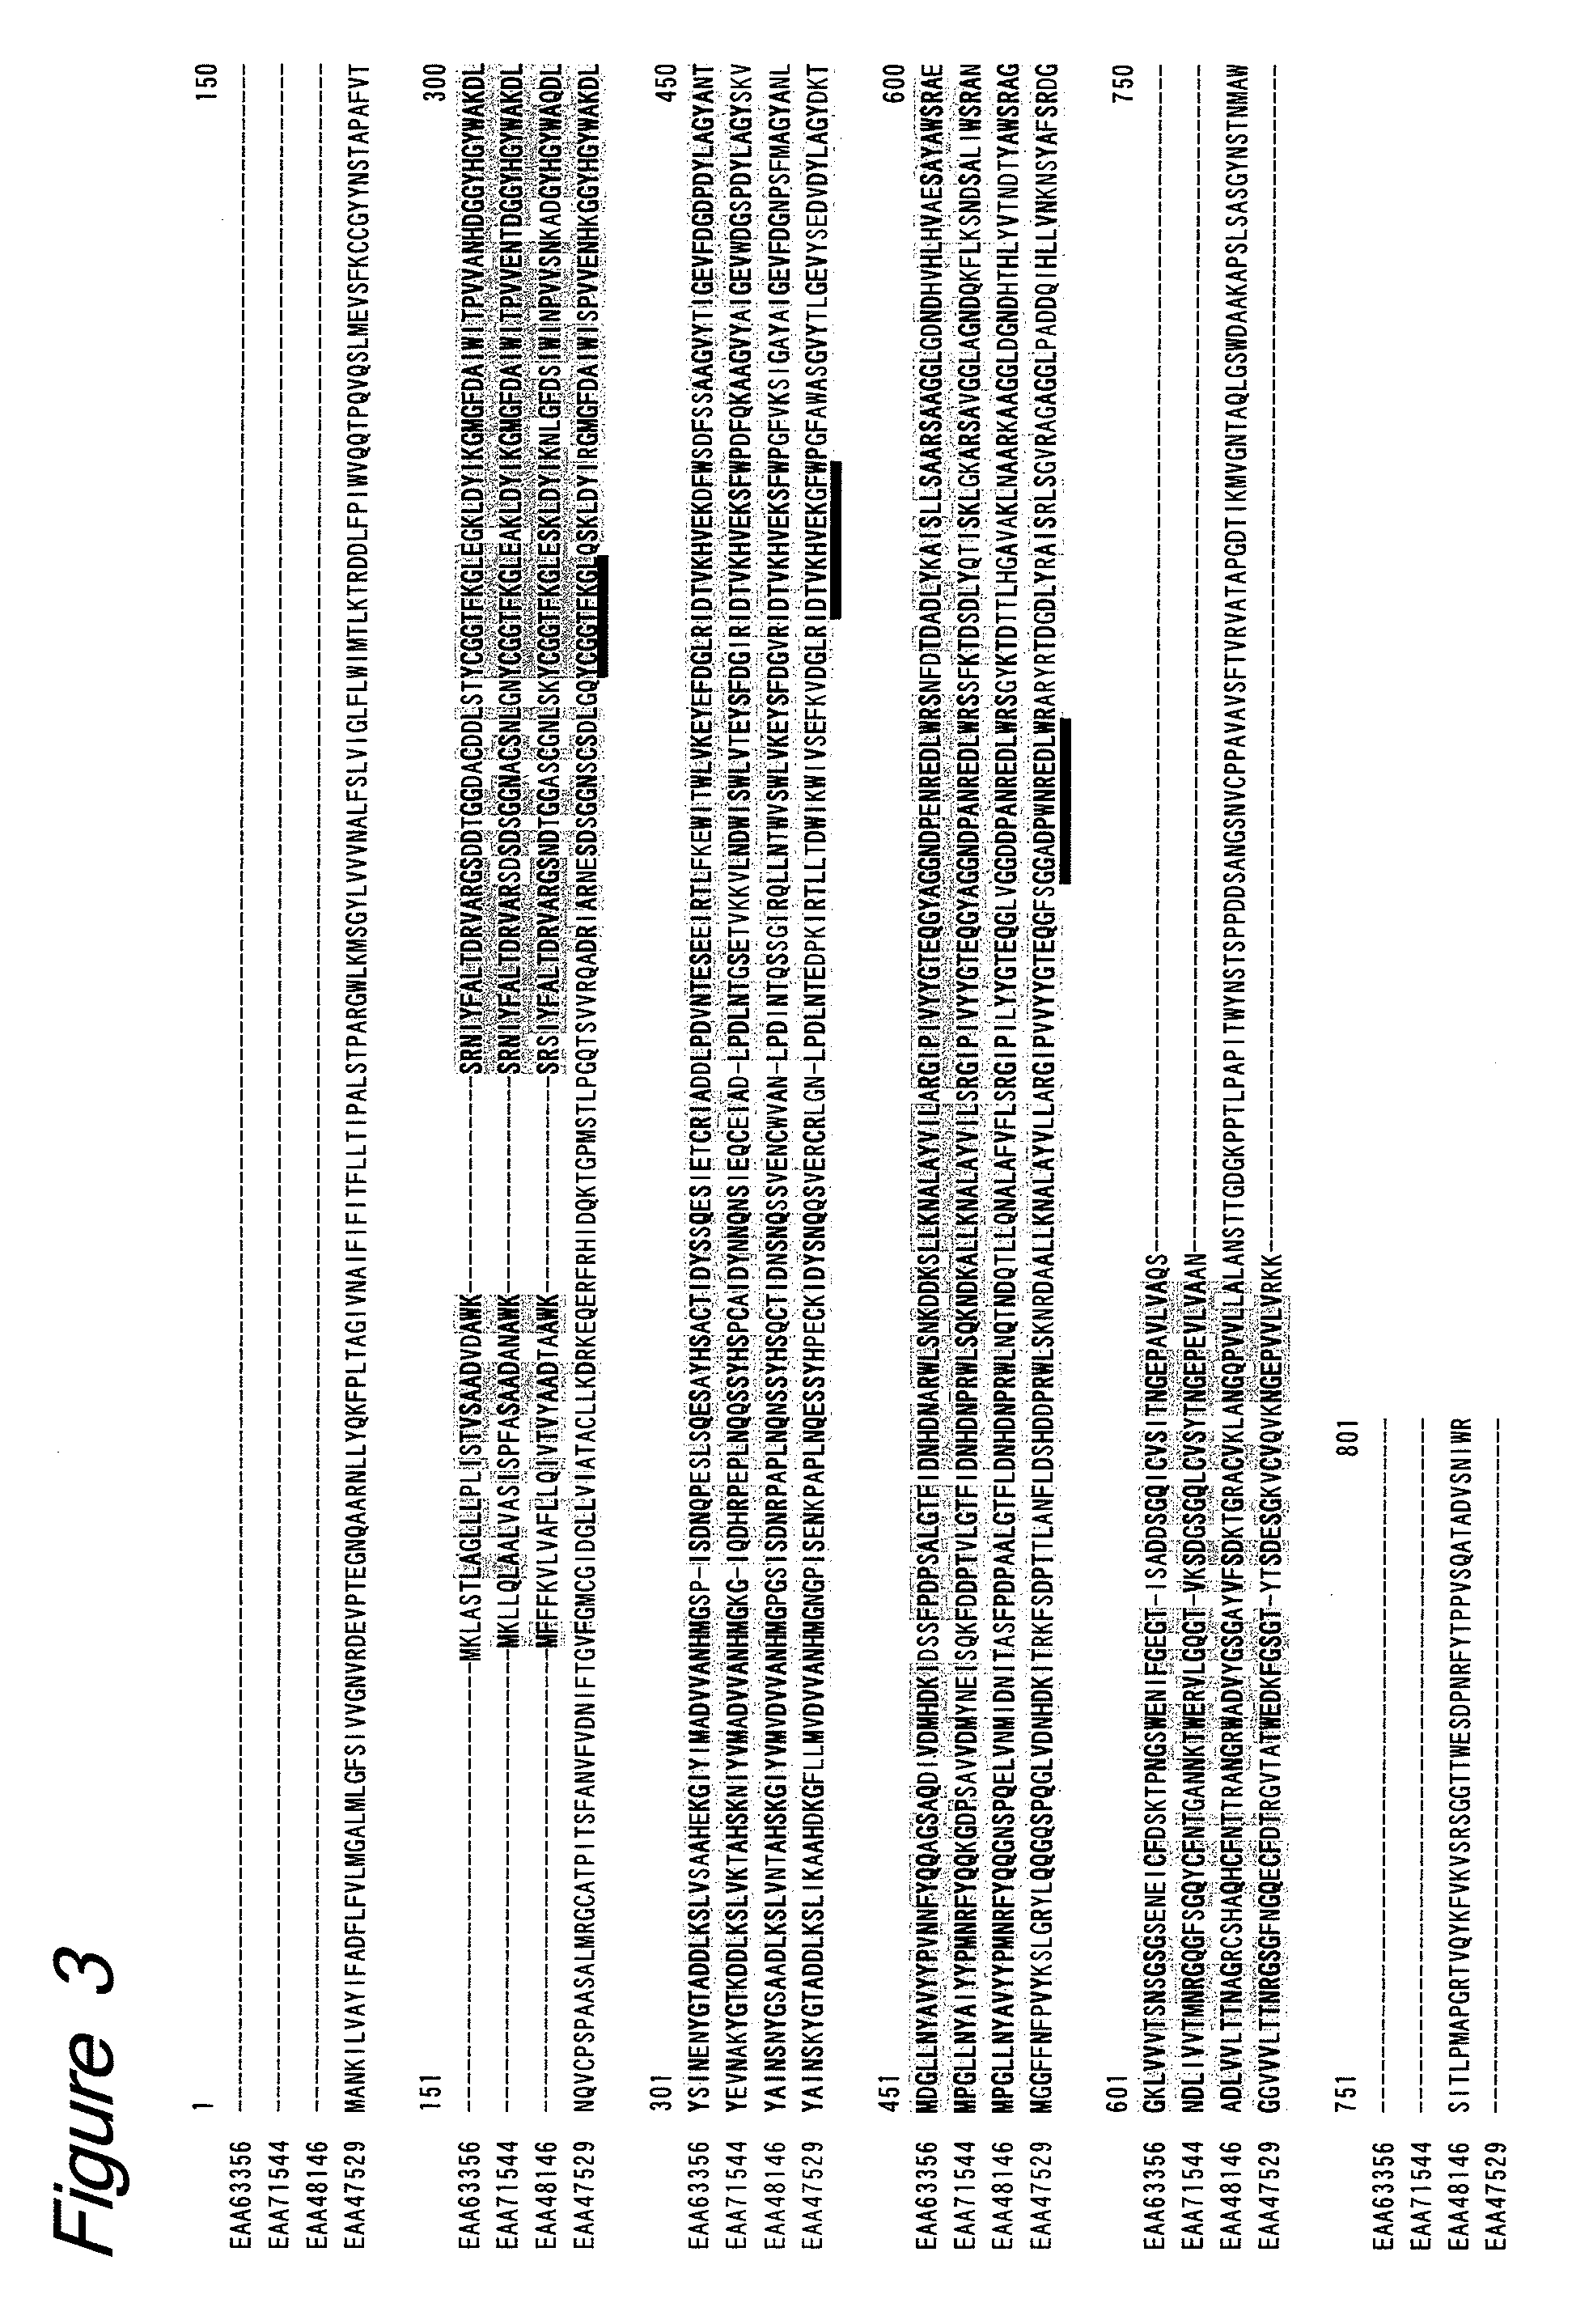 Method for glycosylation of flavonoid compounds